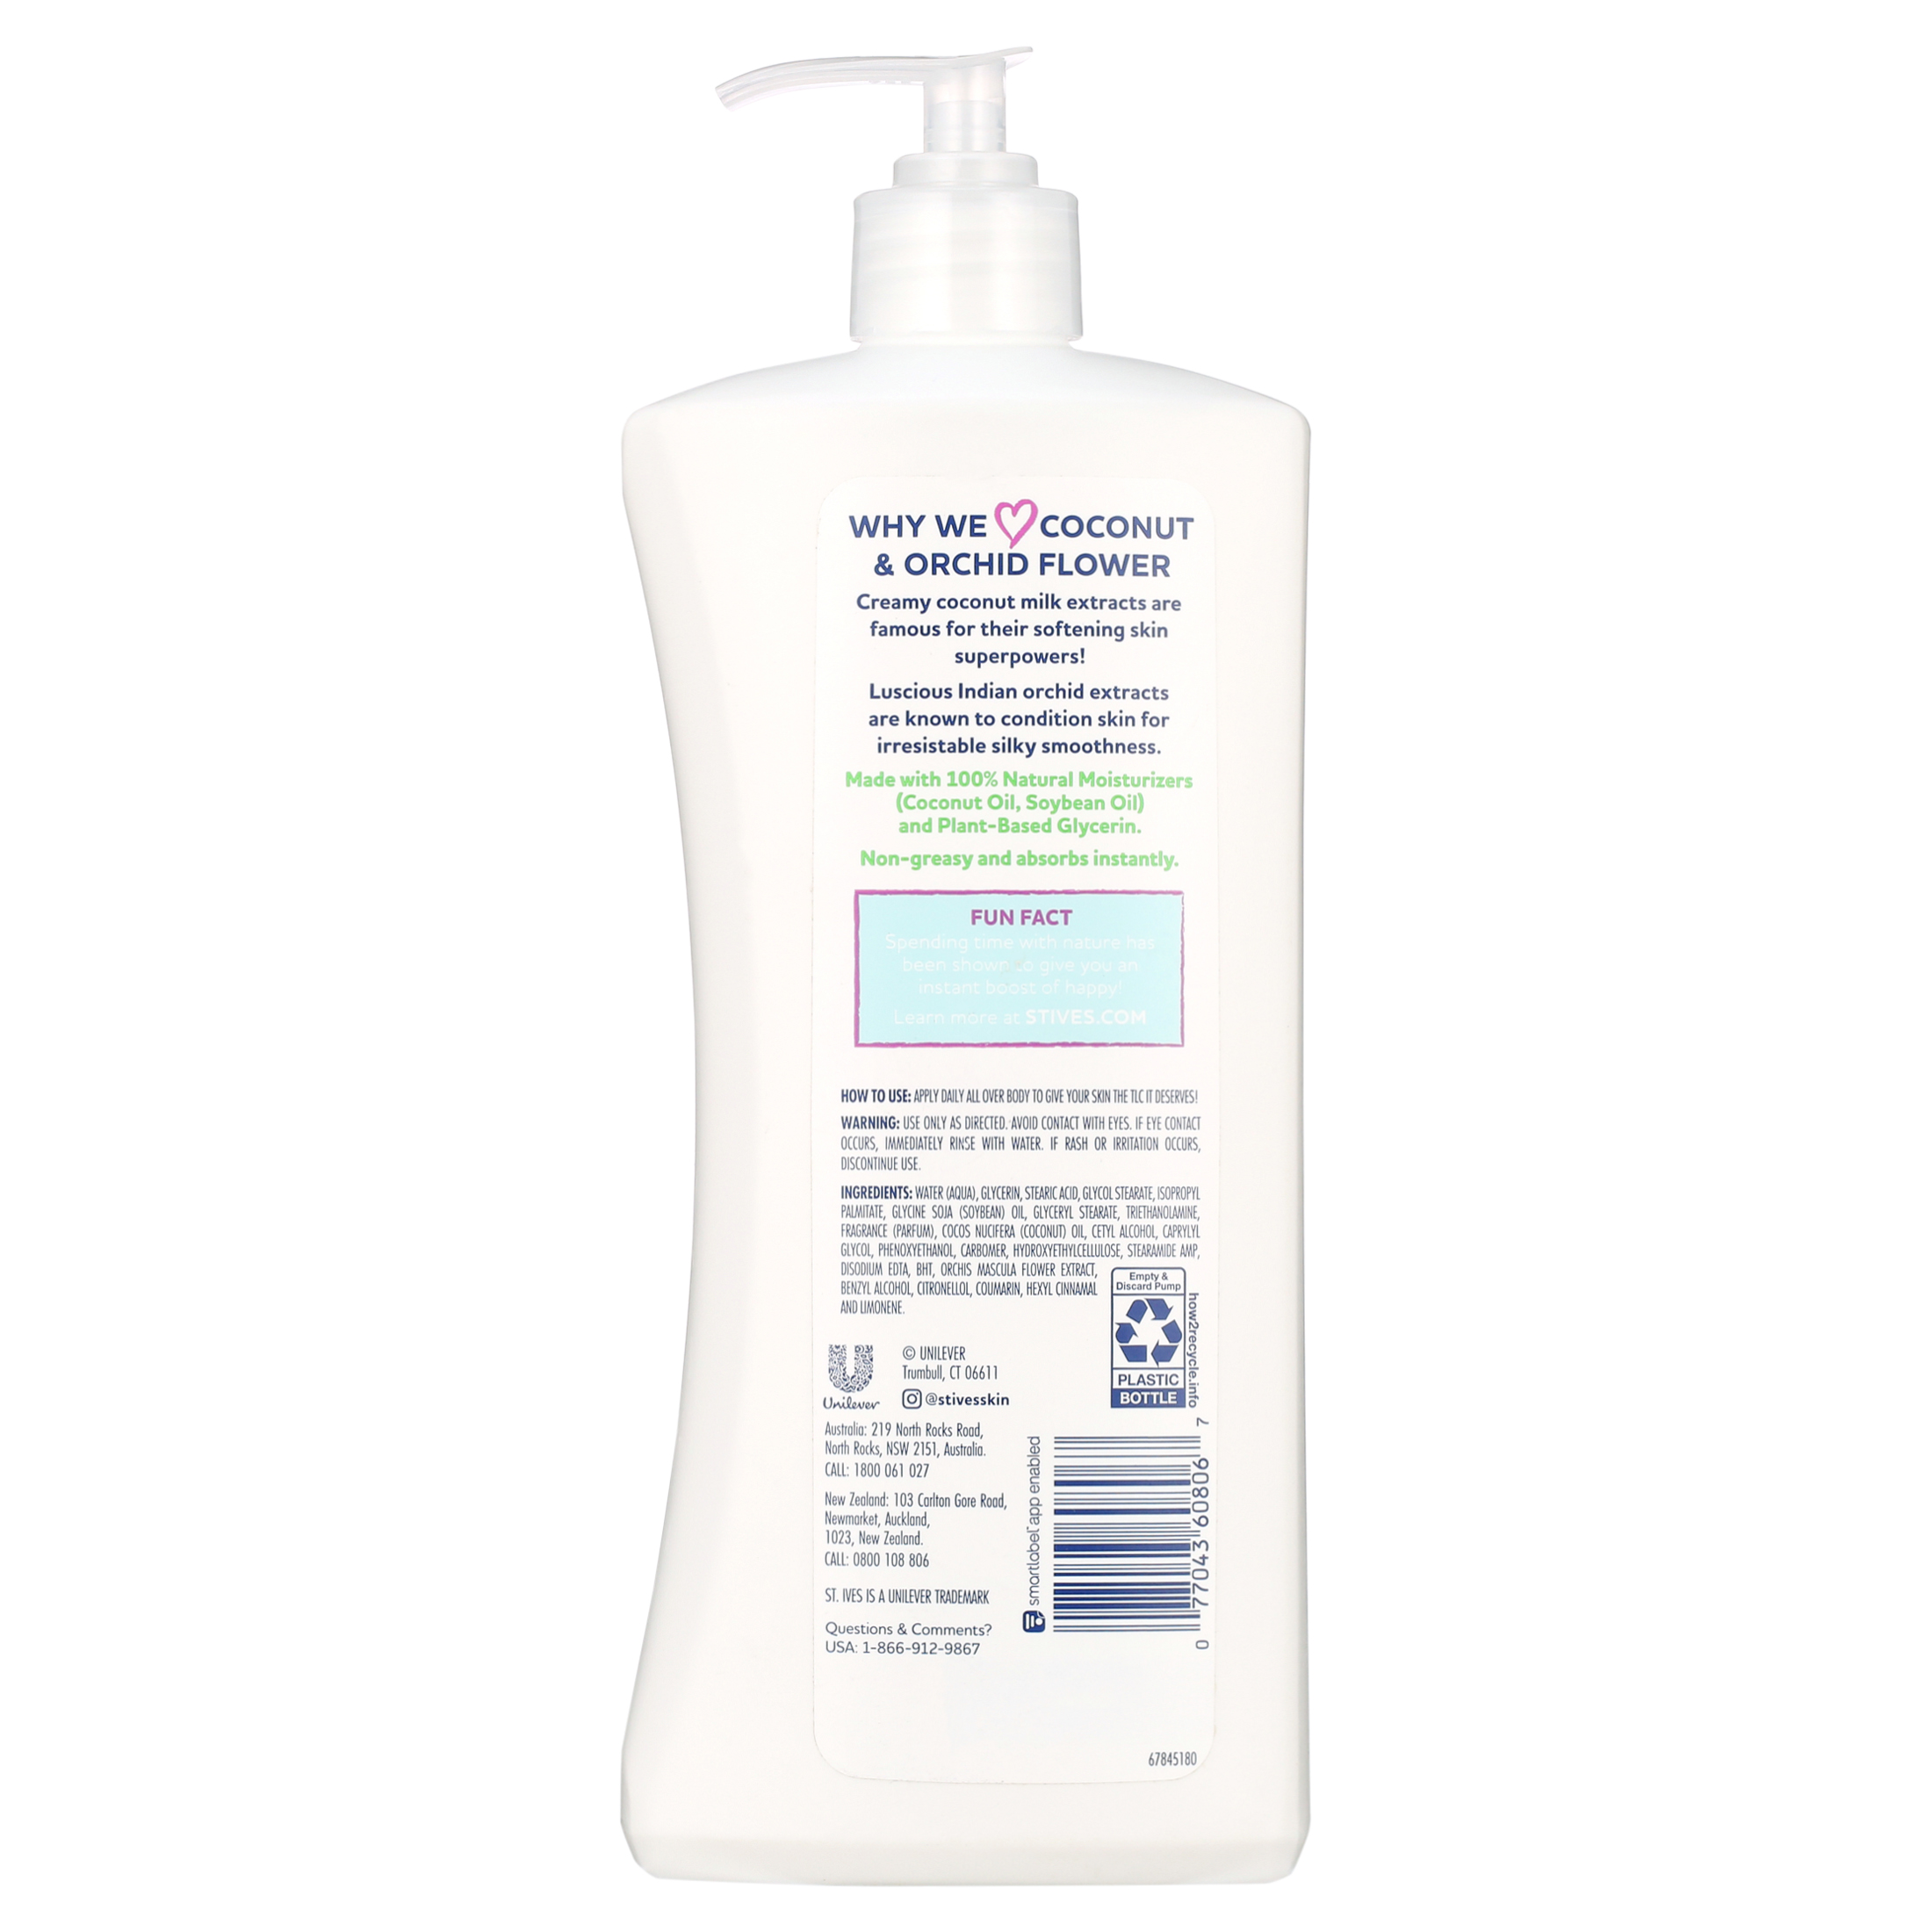 St. Ives Softening Body Lotion Coconut and Orchid 21 oz - image 10 of 10